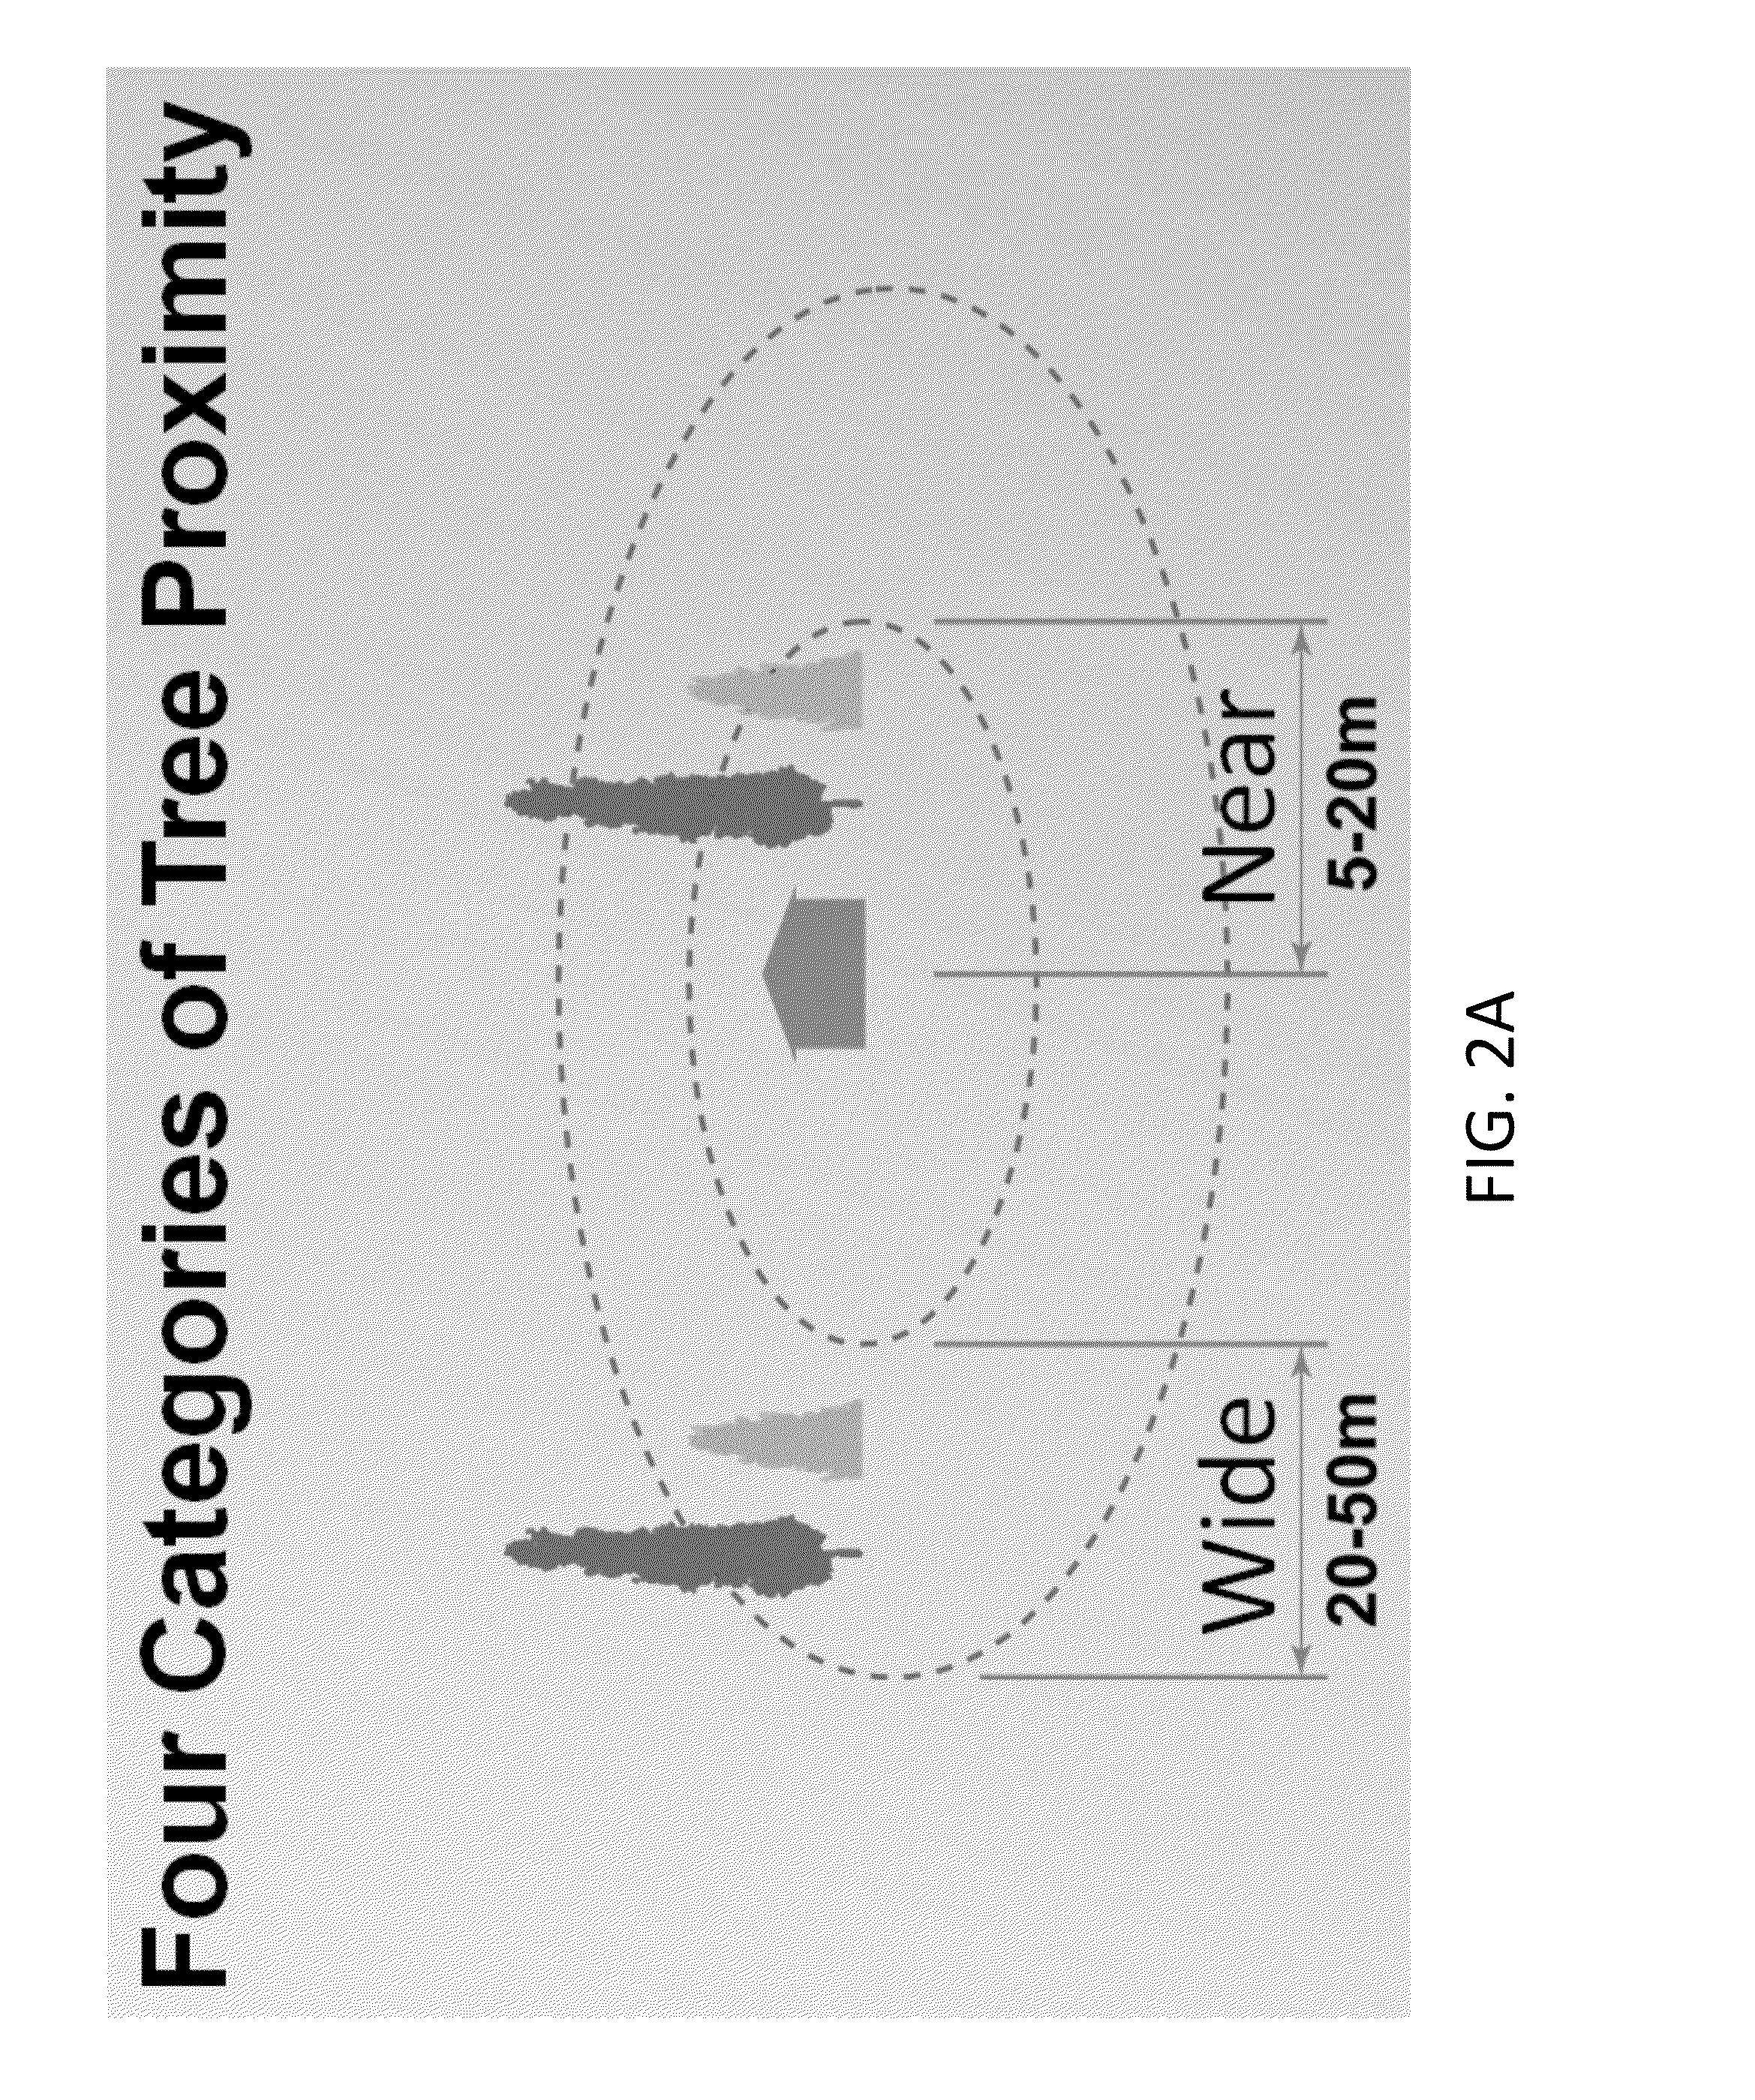 Method of determining structural damage using positive and negative tree proximity factors